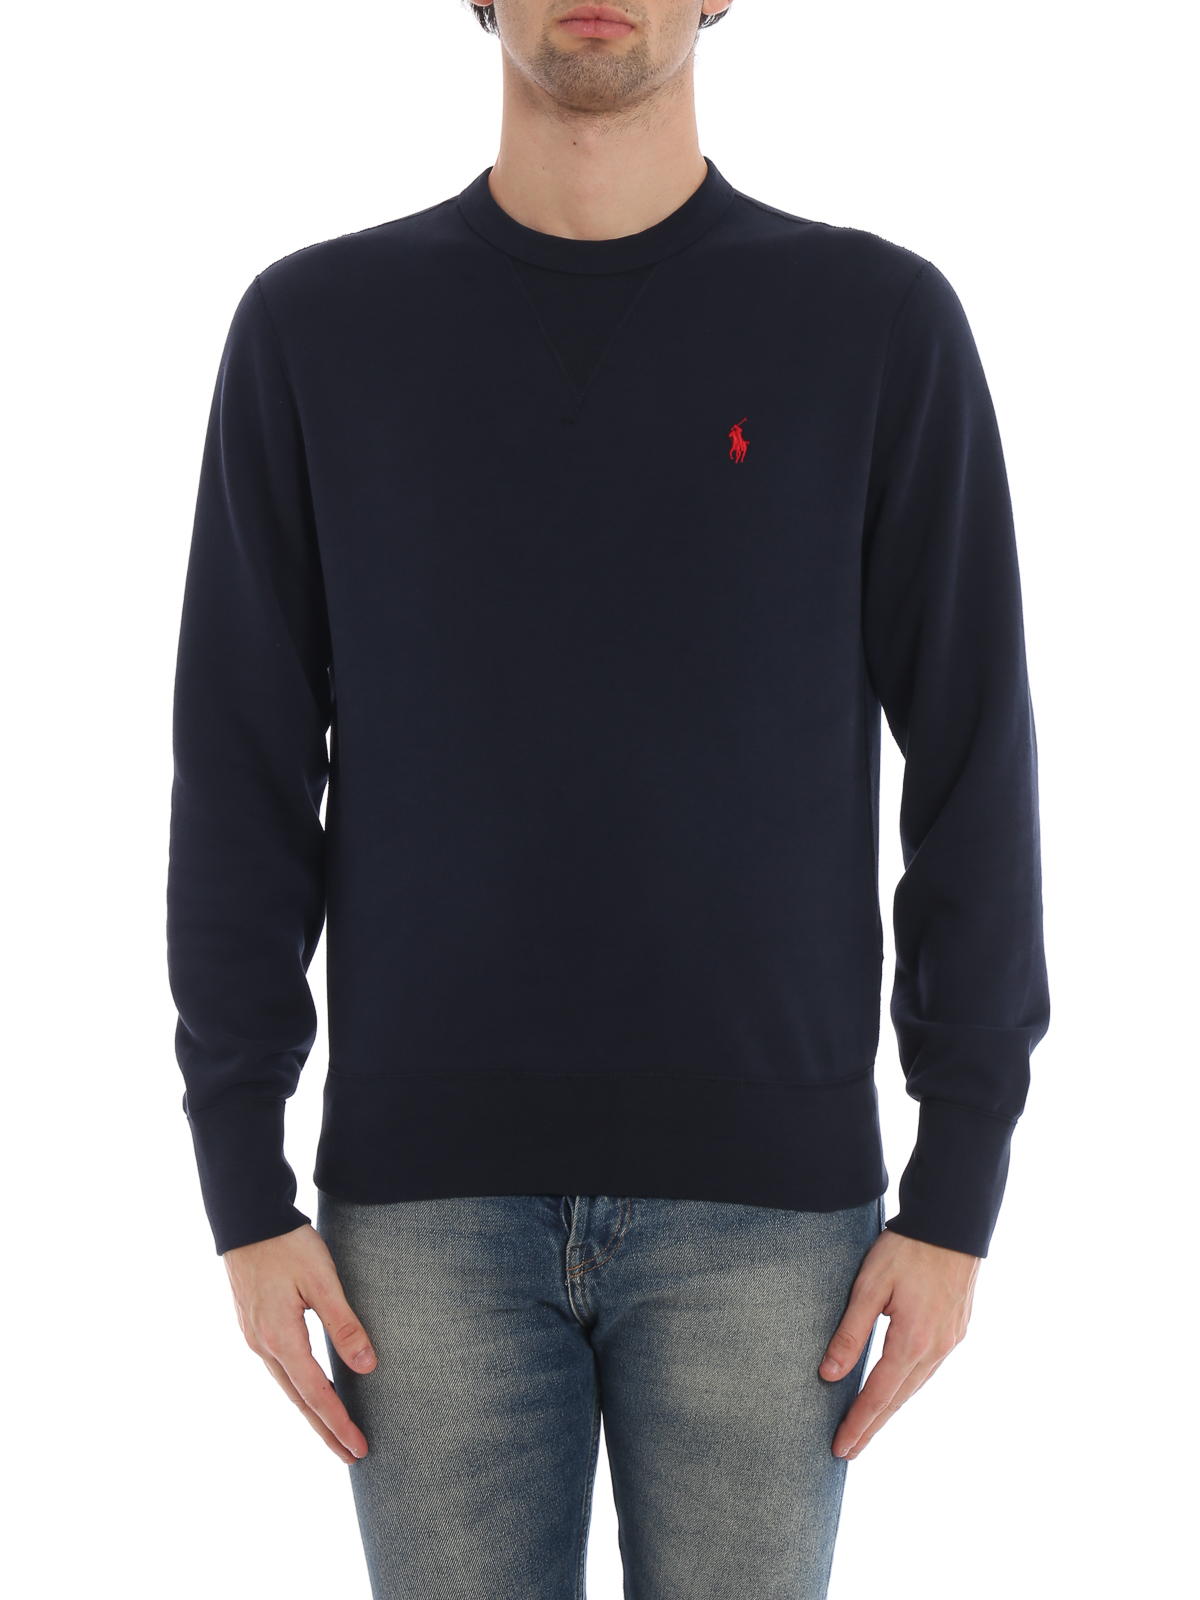 classic polo sweaters